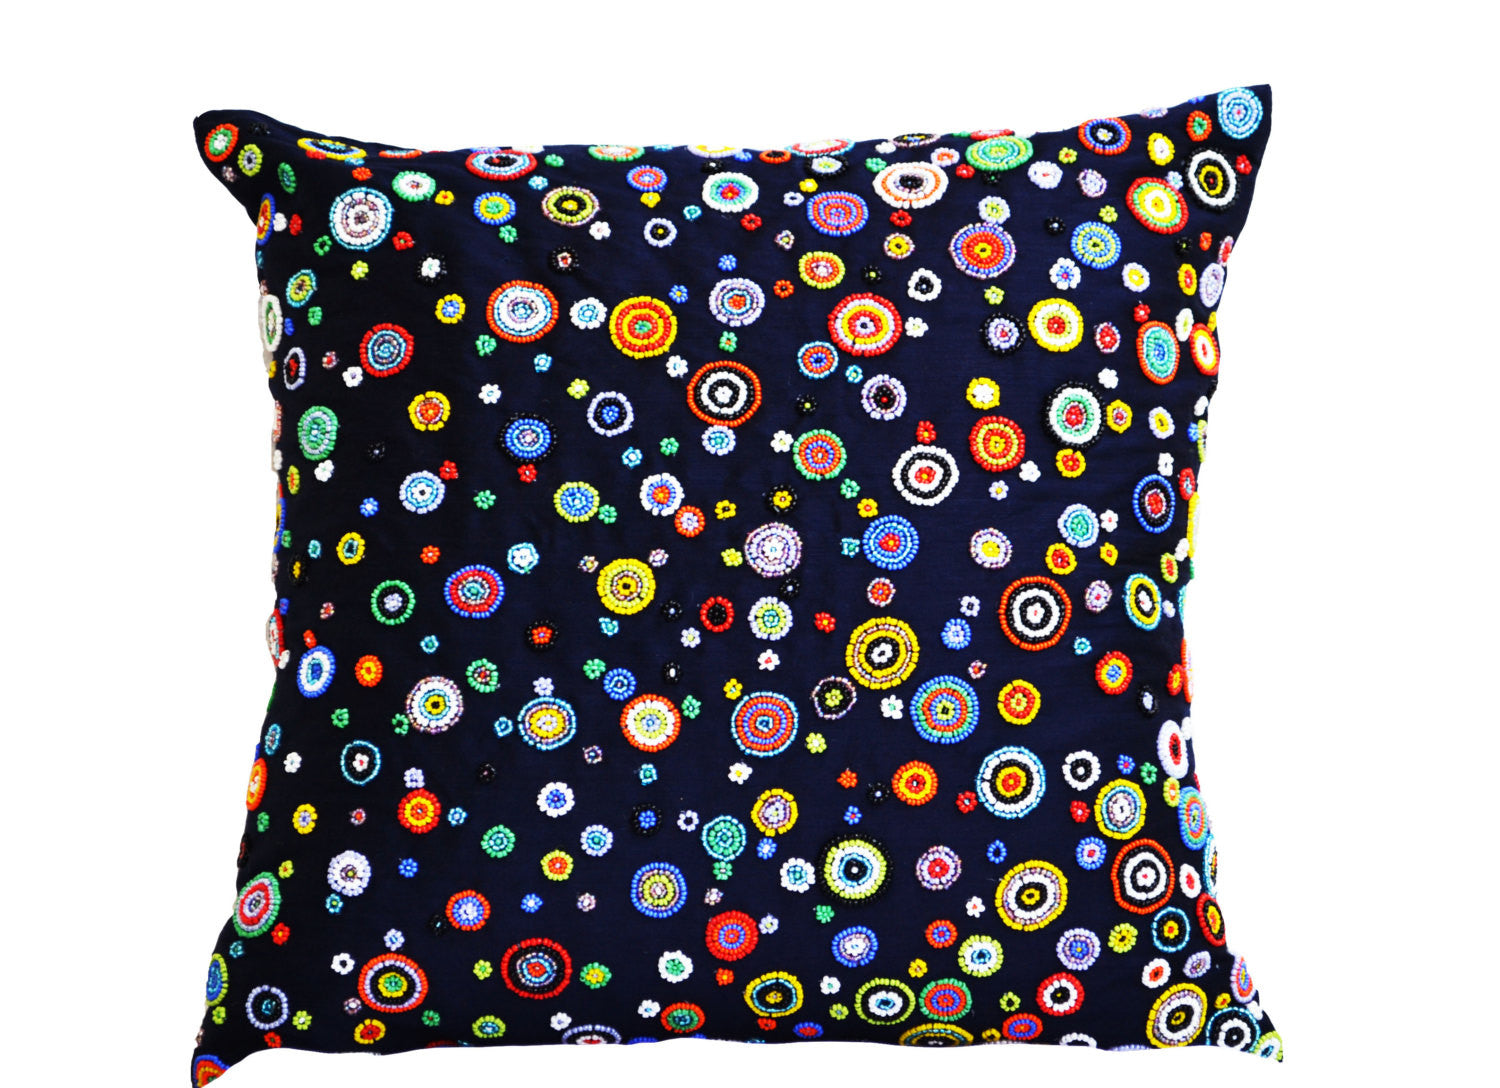 Handmade navy blue throw pillow with beads in multiple colors